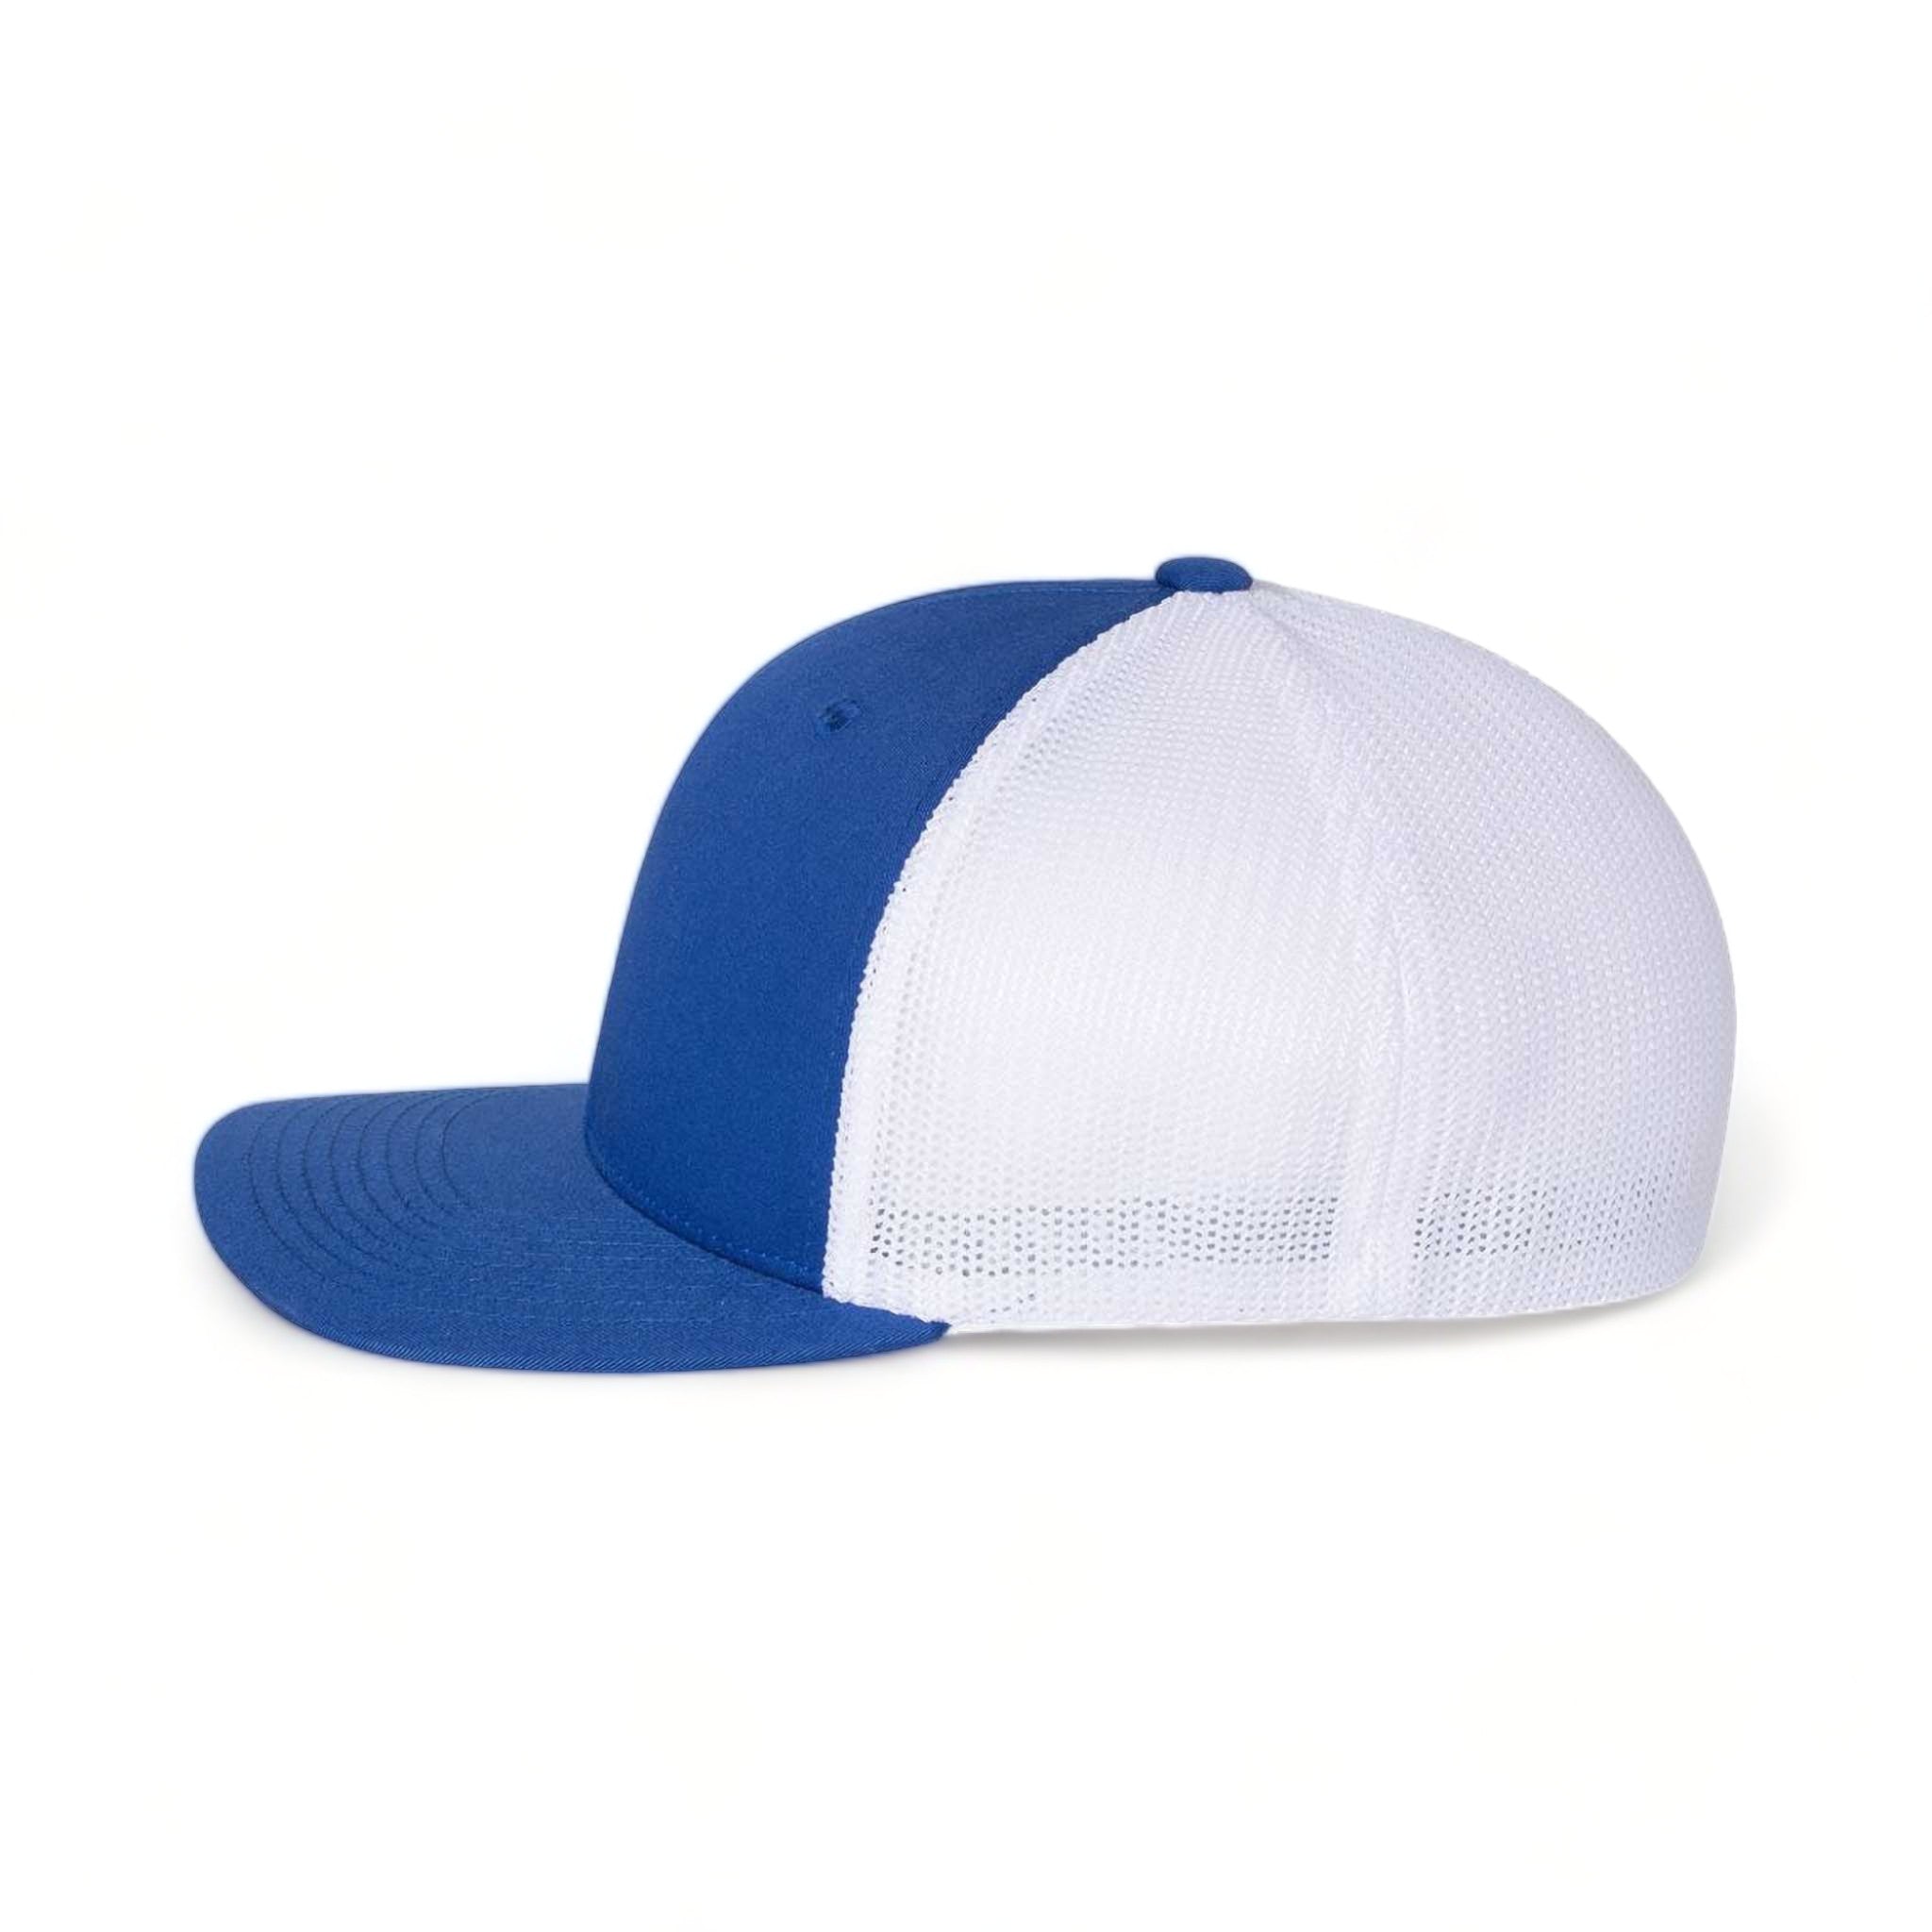 Side view of Flexfit 6511 custom hat in royal and white